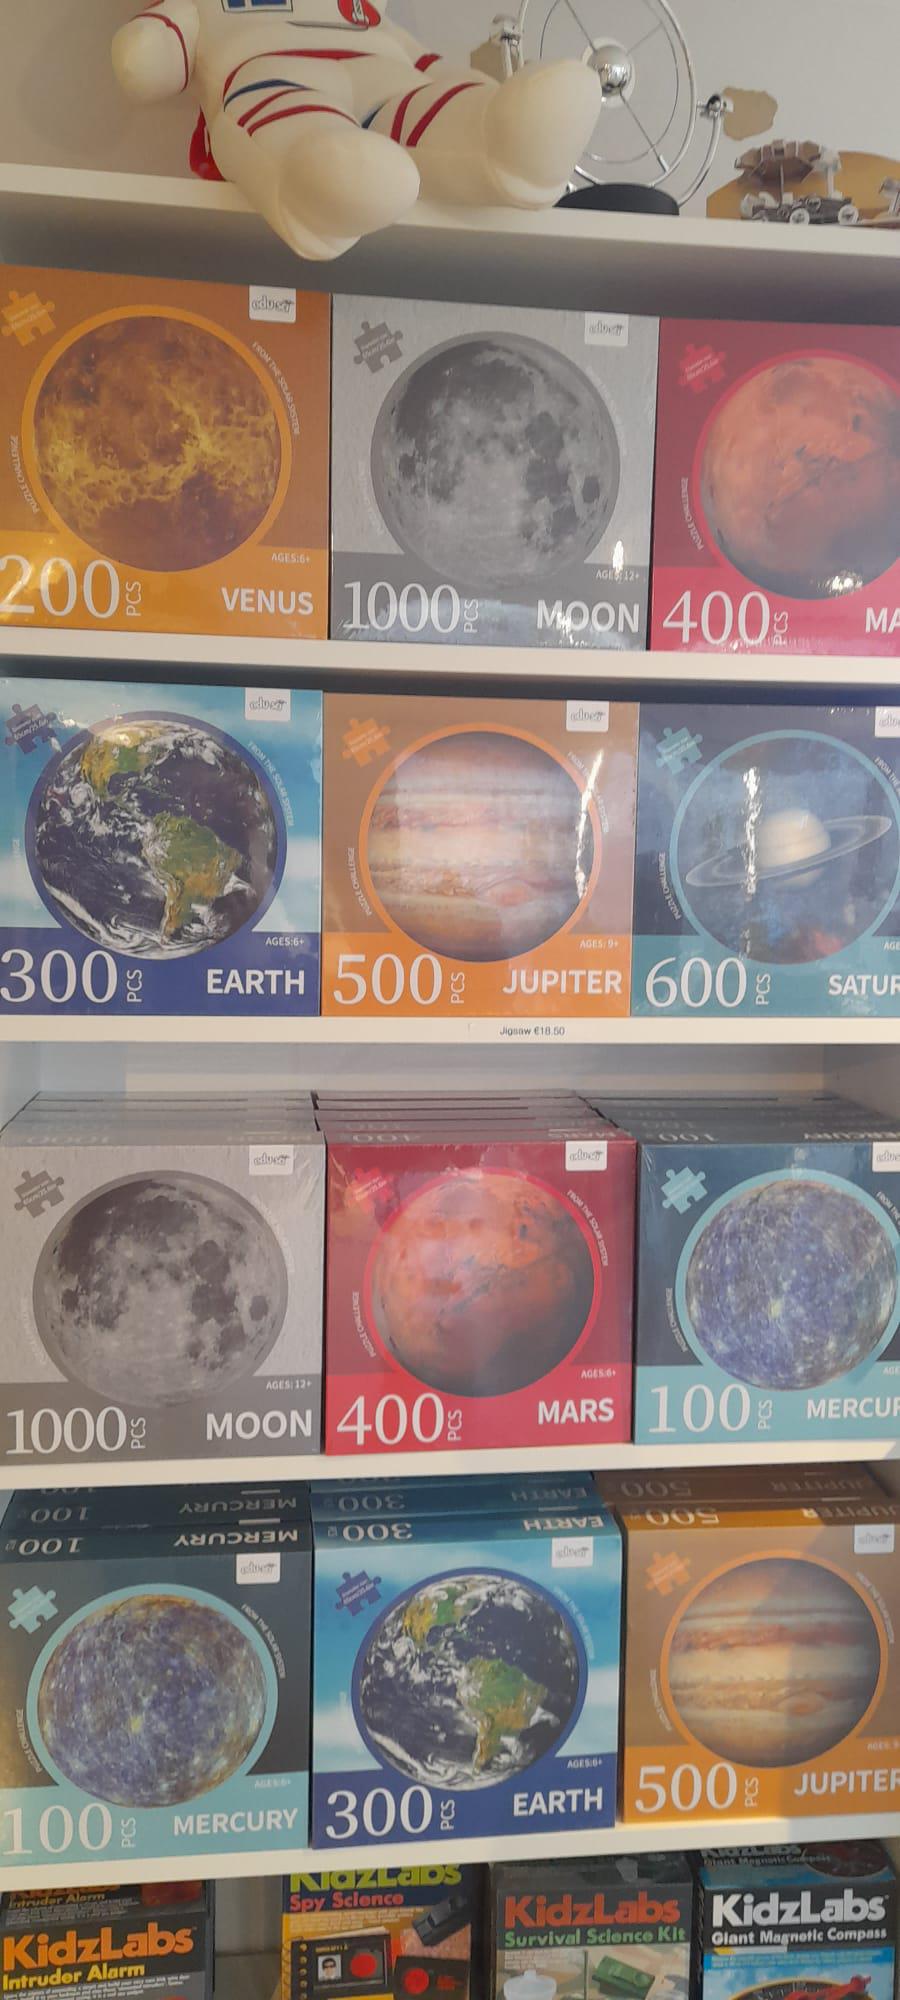 A selection of space-themed jigsaw puzzles in varying degrees of complexity. The photo shows the boxes for puzzles such as Venus, Mars, Jupiter, Saturn, Mercury, Earth and the Moon. Puzzles range in compelxity from 100 pieces to 1000.